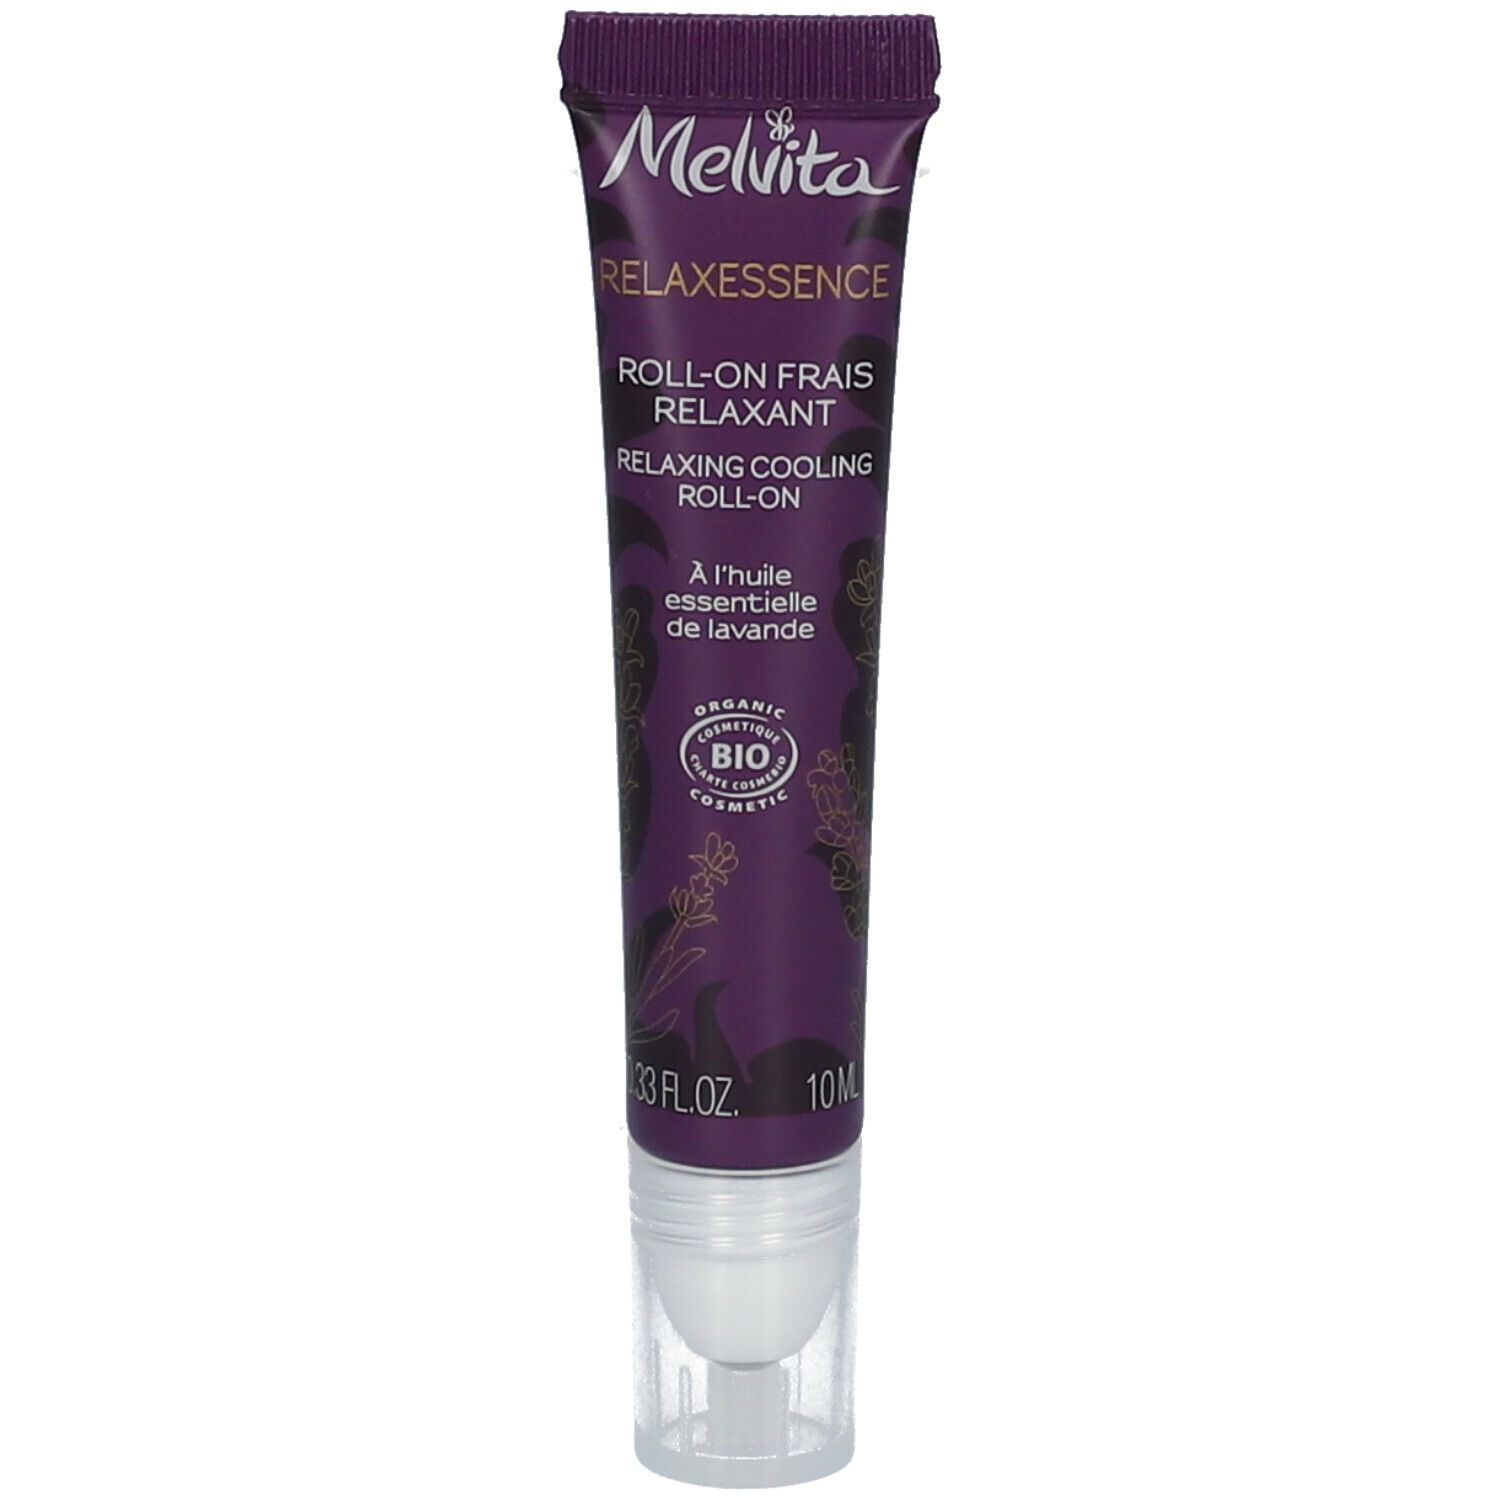 Melvita Roll-on relaxant Relaxessence